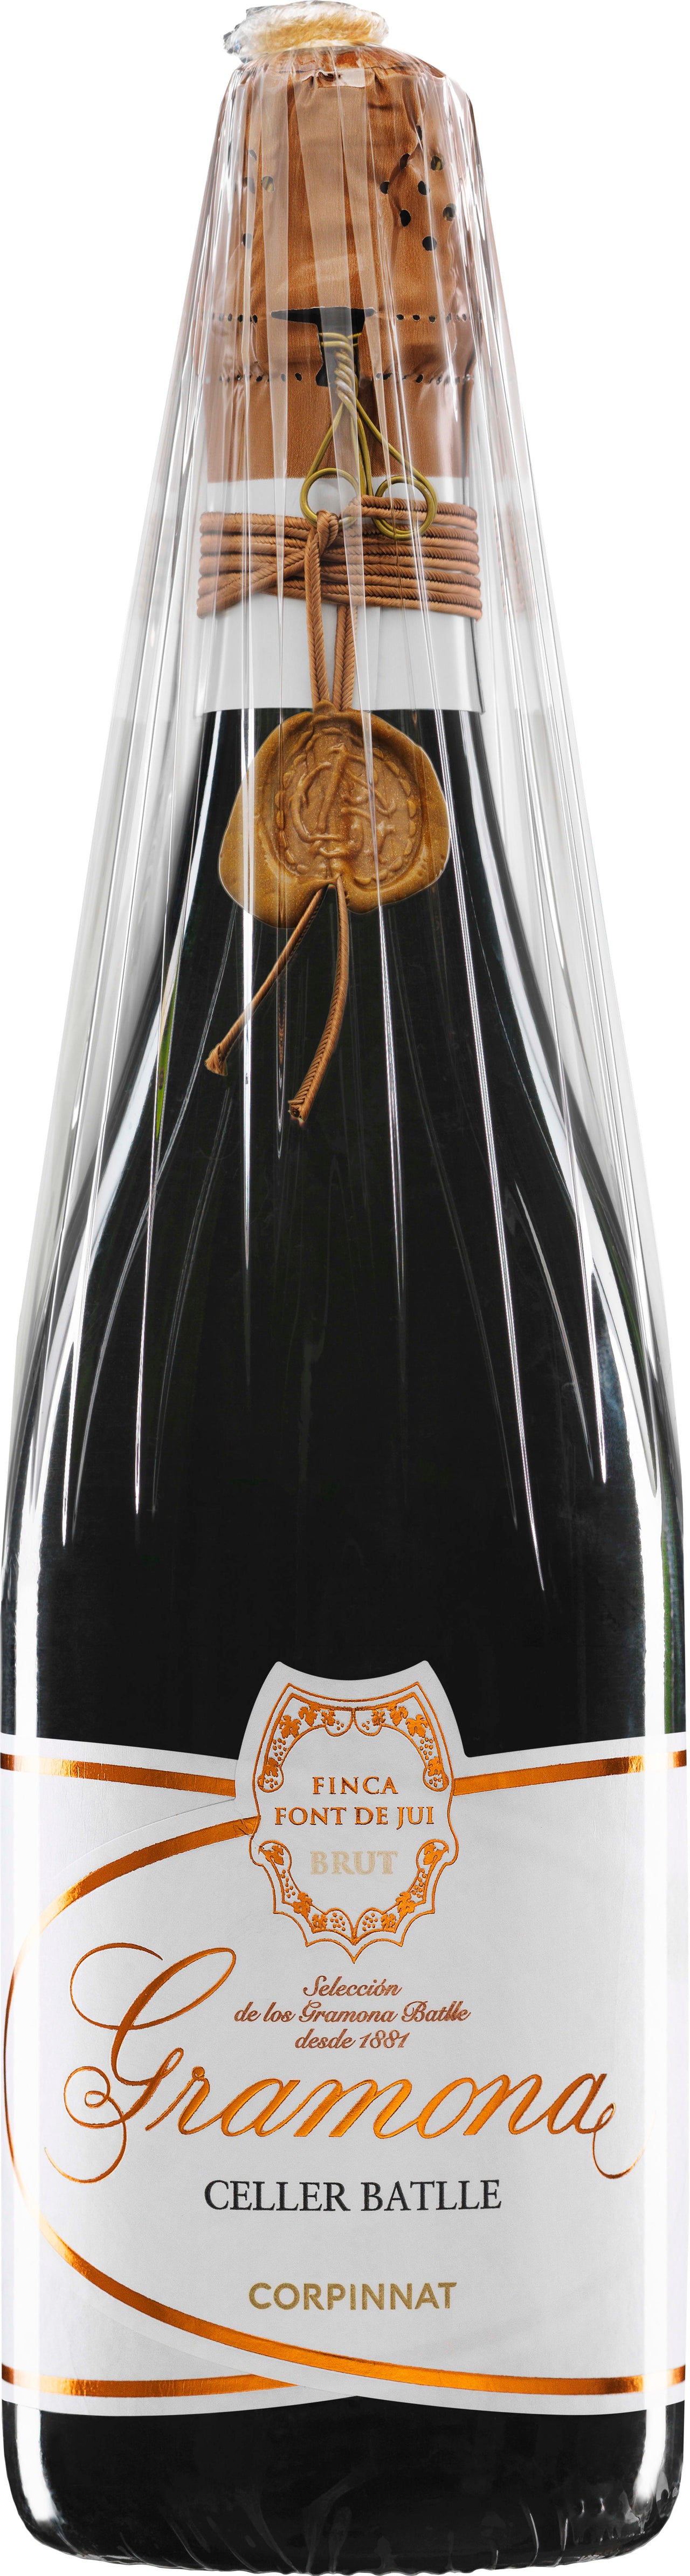 Gramona Celler Batlle Brut 2011 75cl - Buy Gramona Wines from GREAT WINES DIRECT wine shop